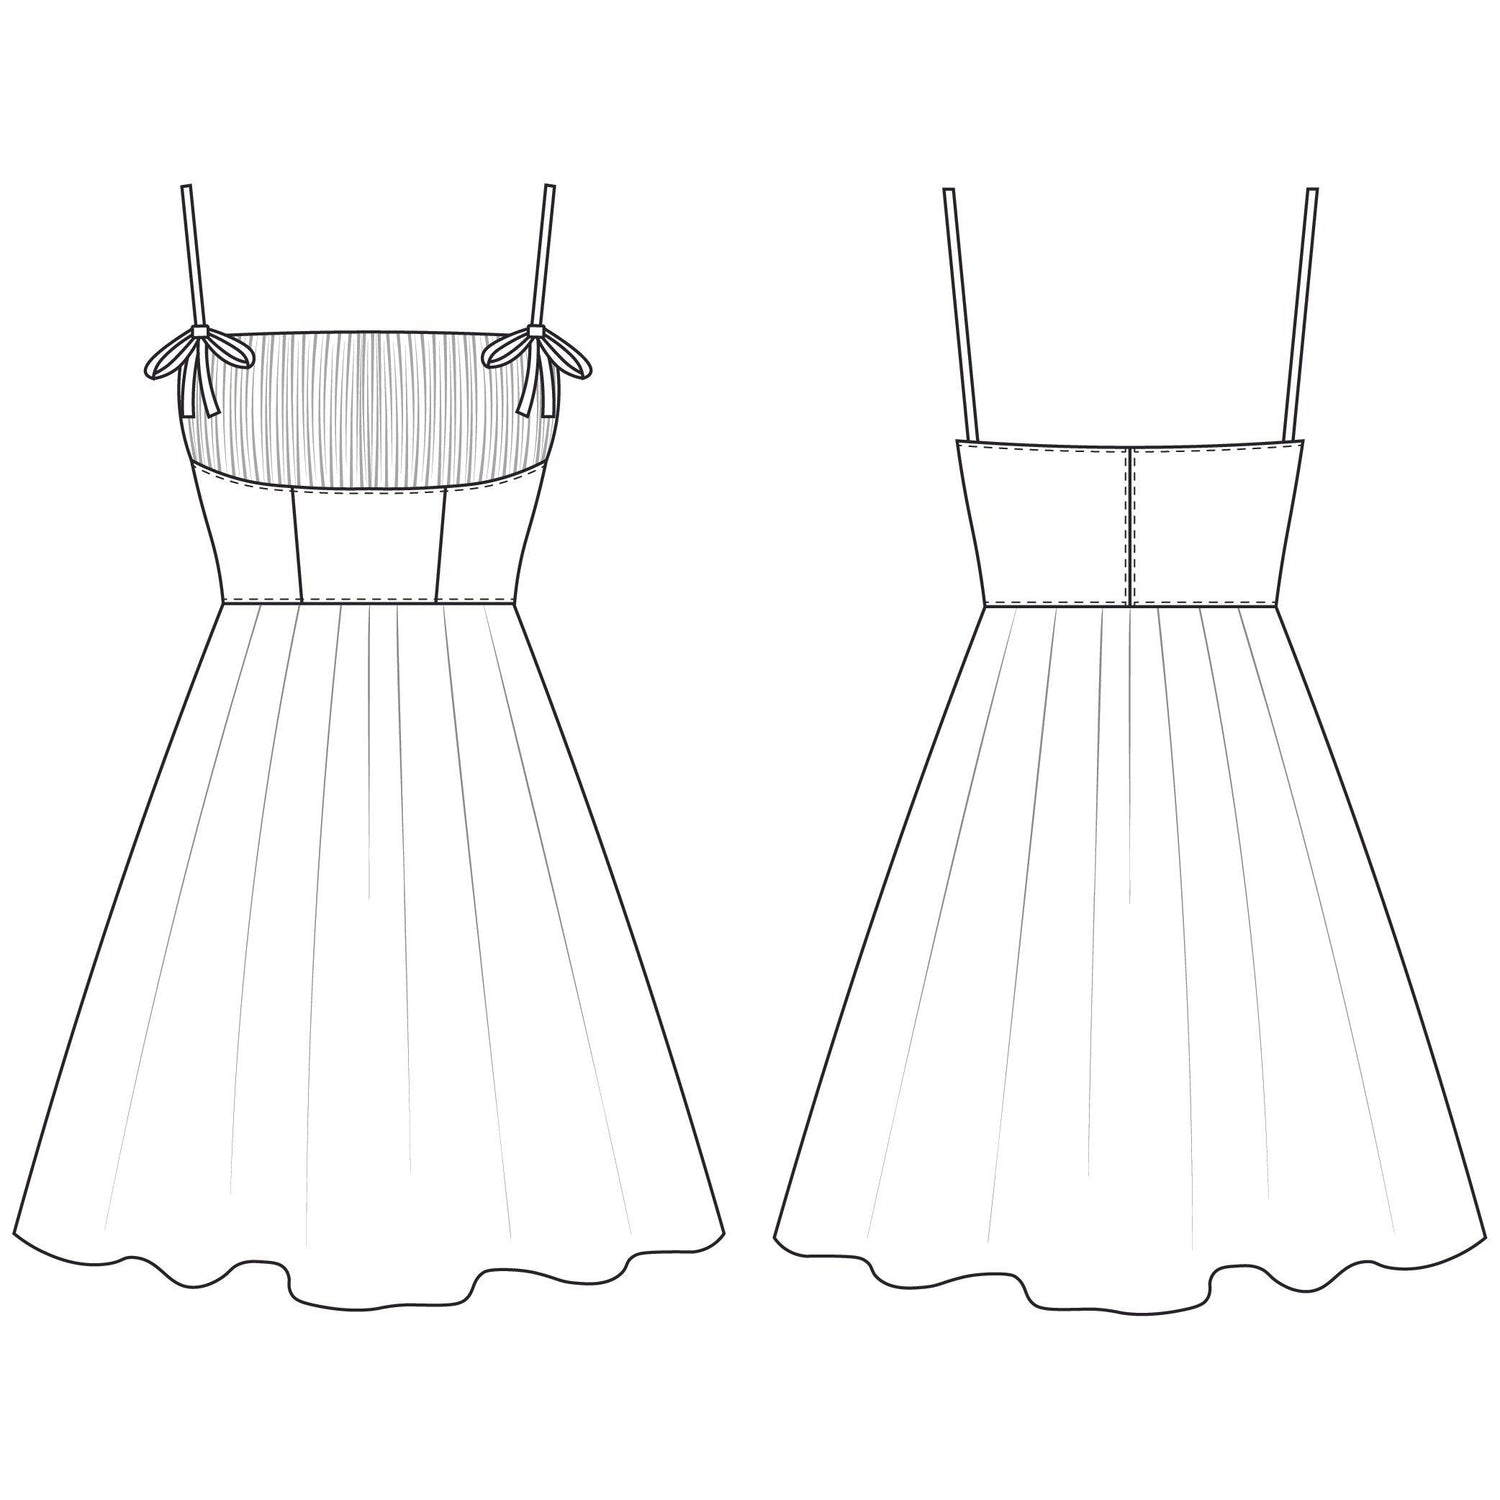 Line drawing front and back views of "Marilyn Monroe Style Bombshell Dress"